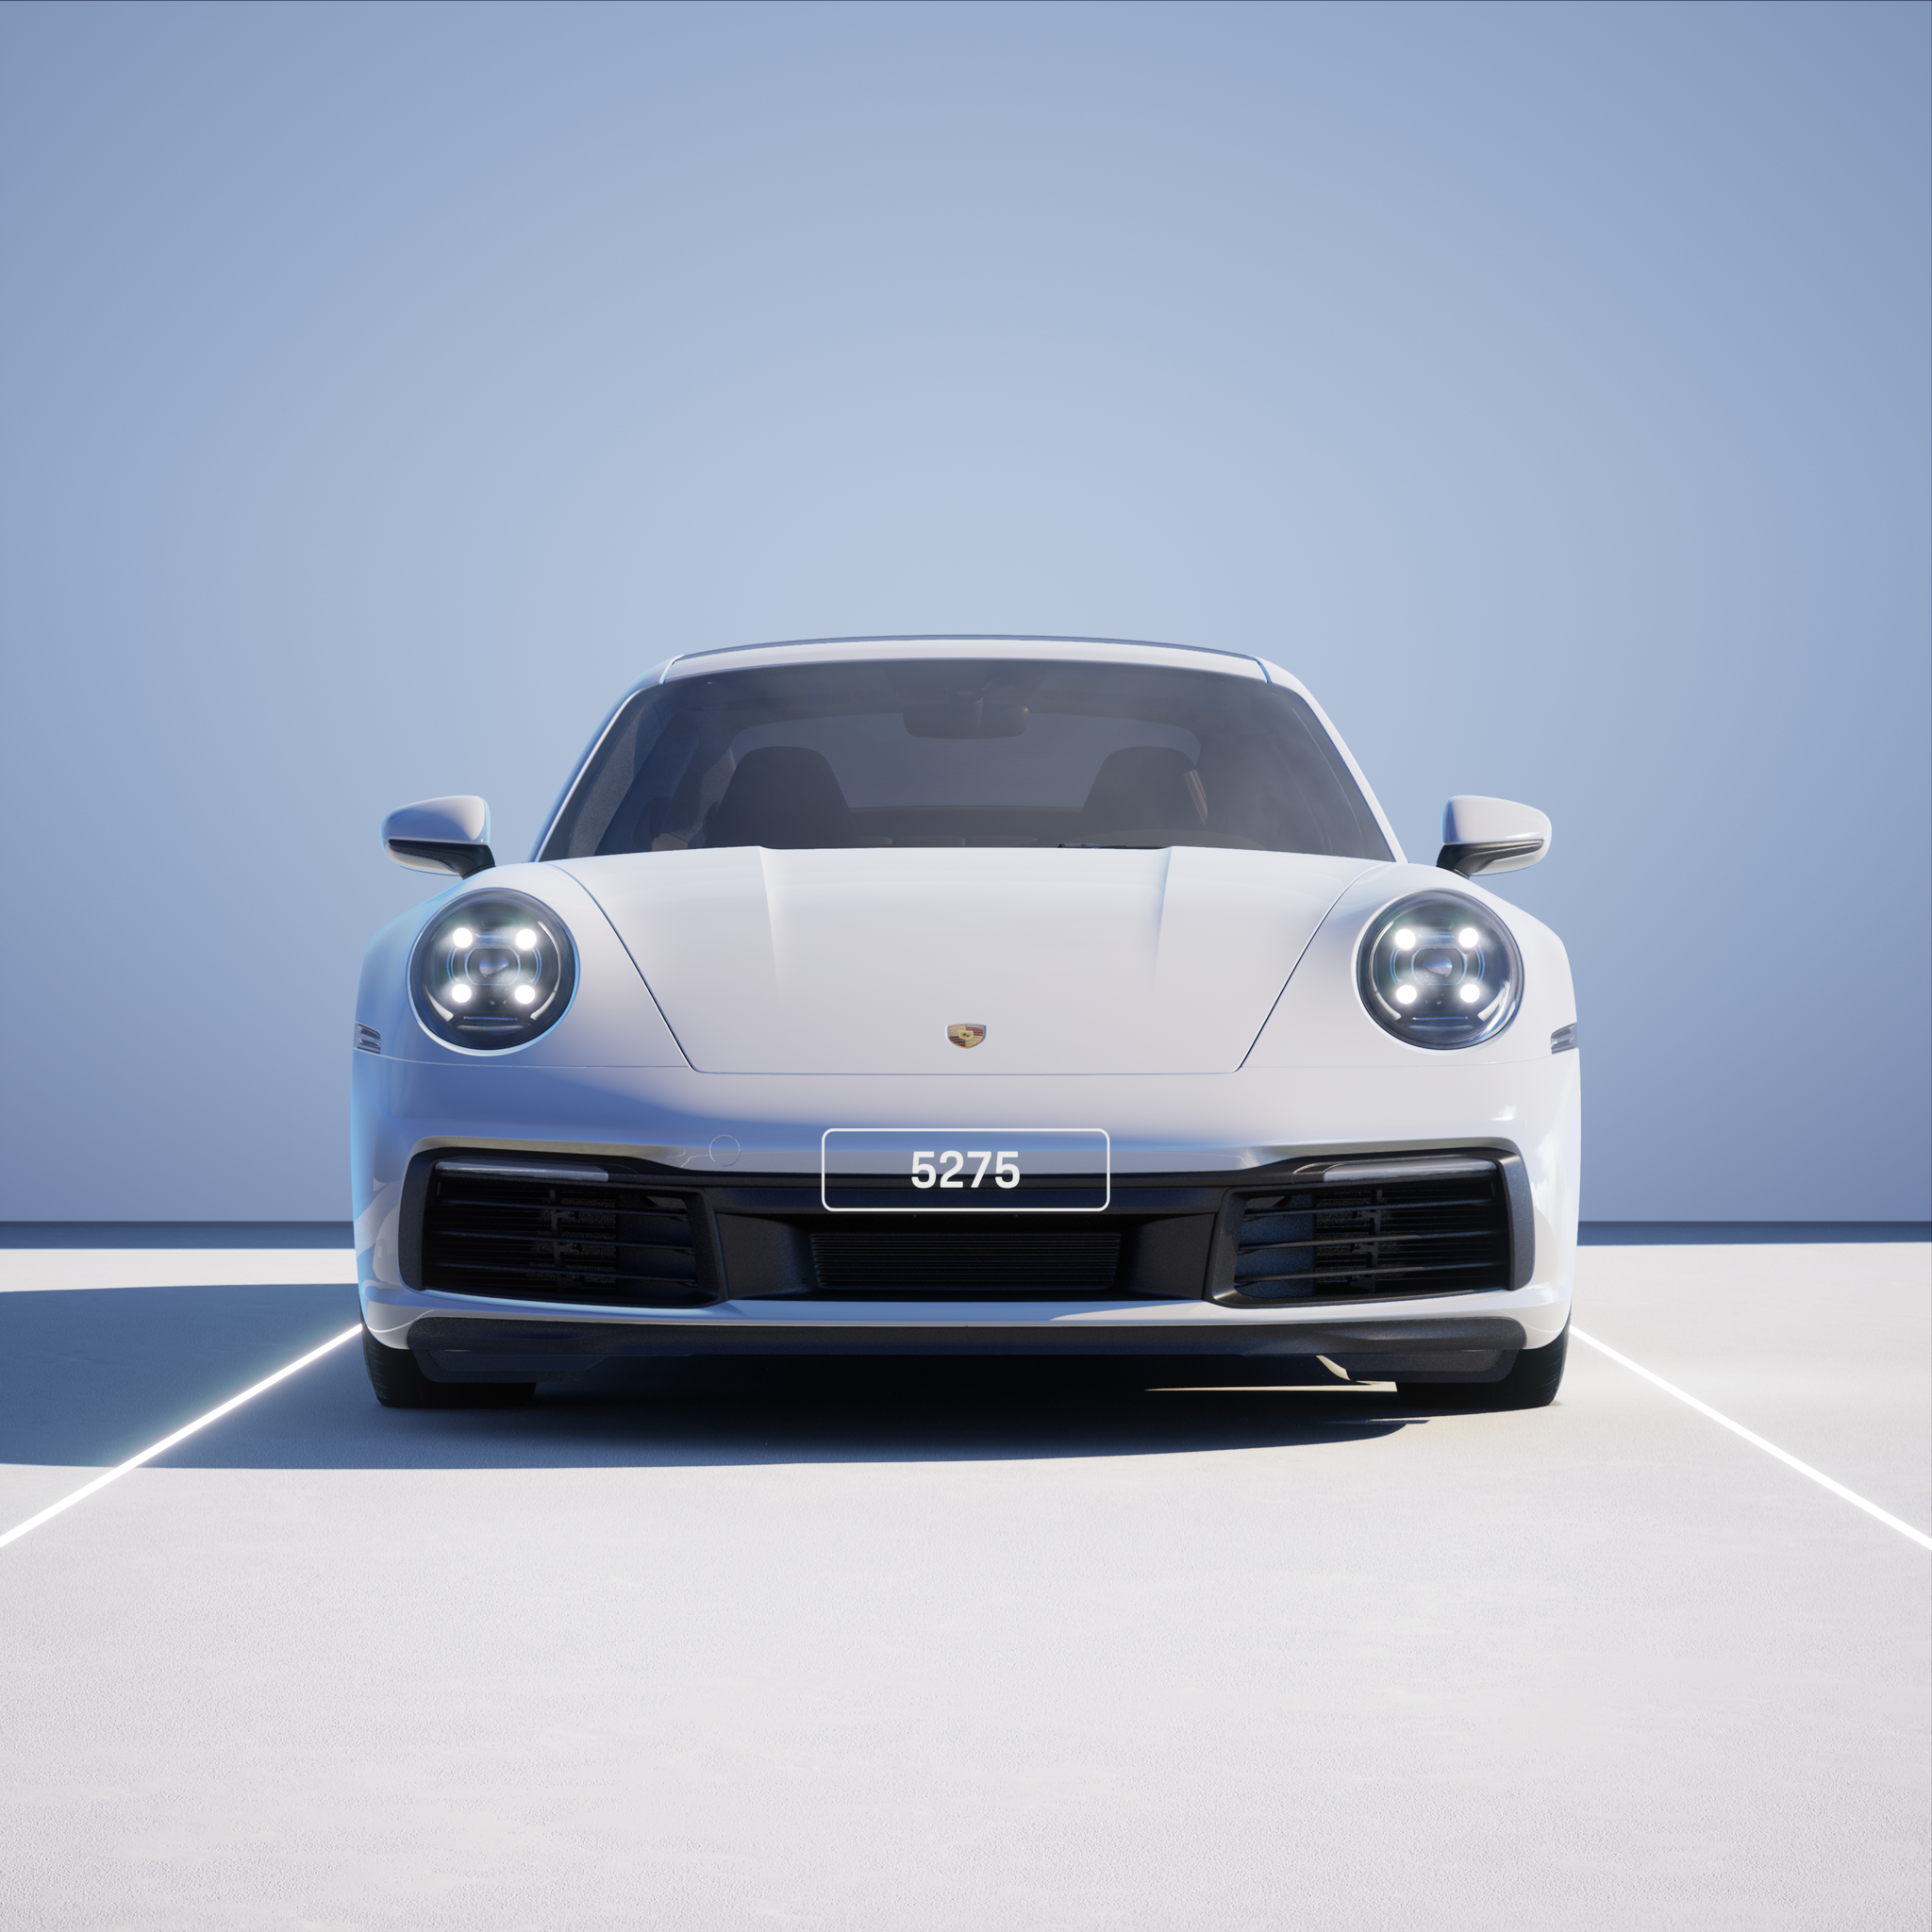 The PORSCHΞ 911 5275 image in phase